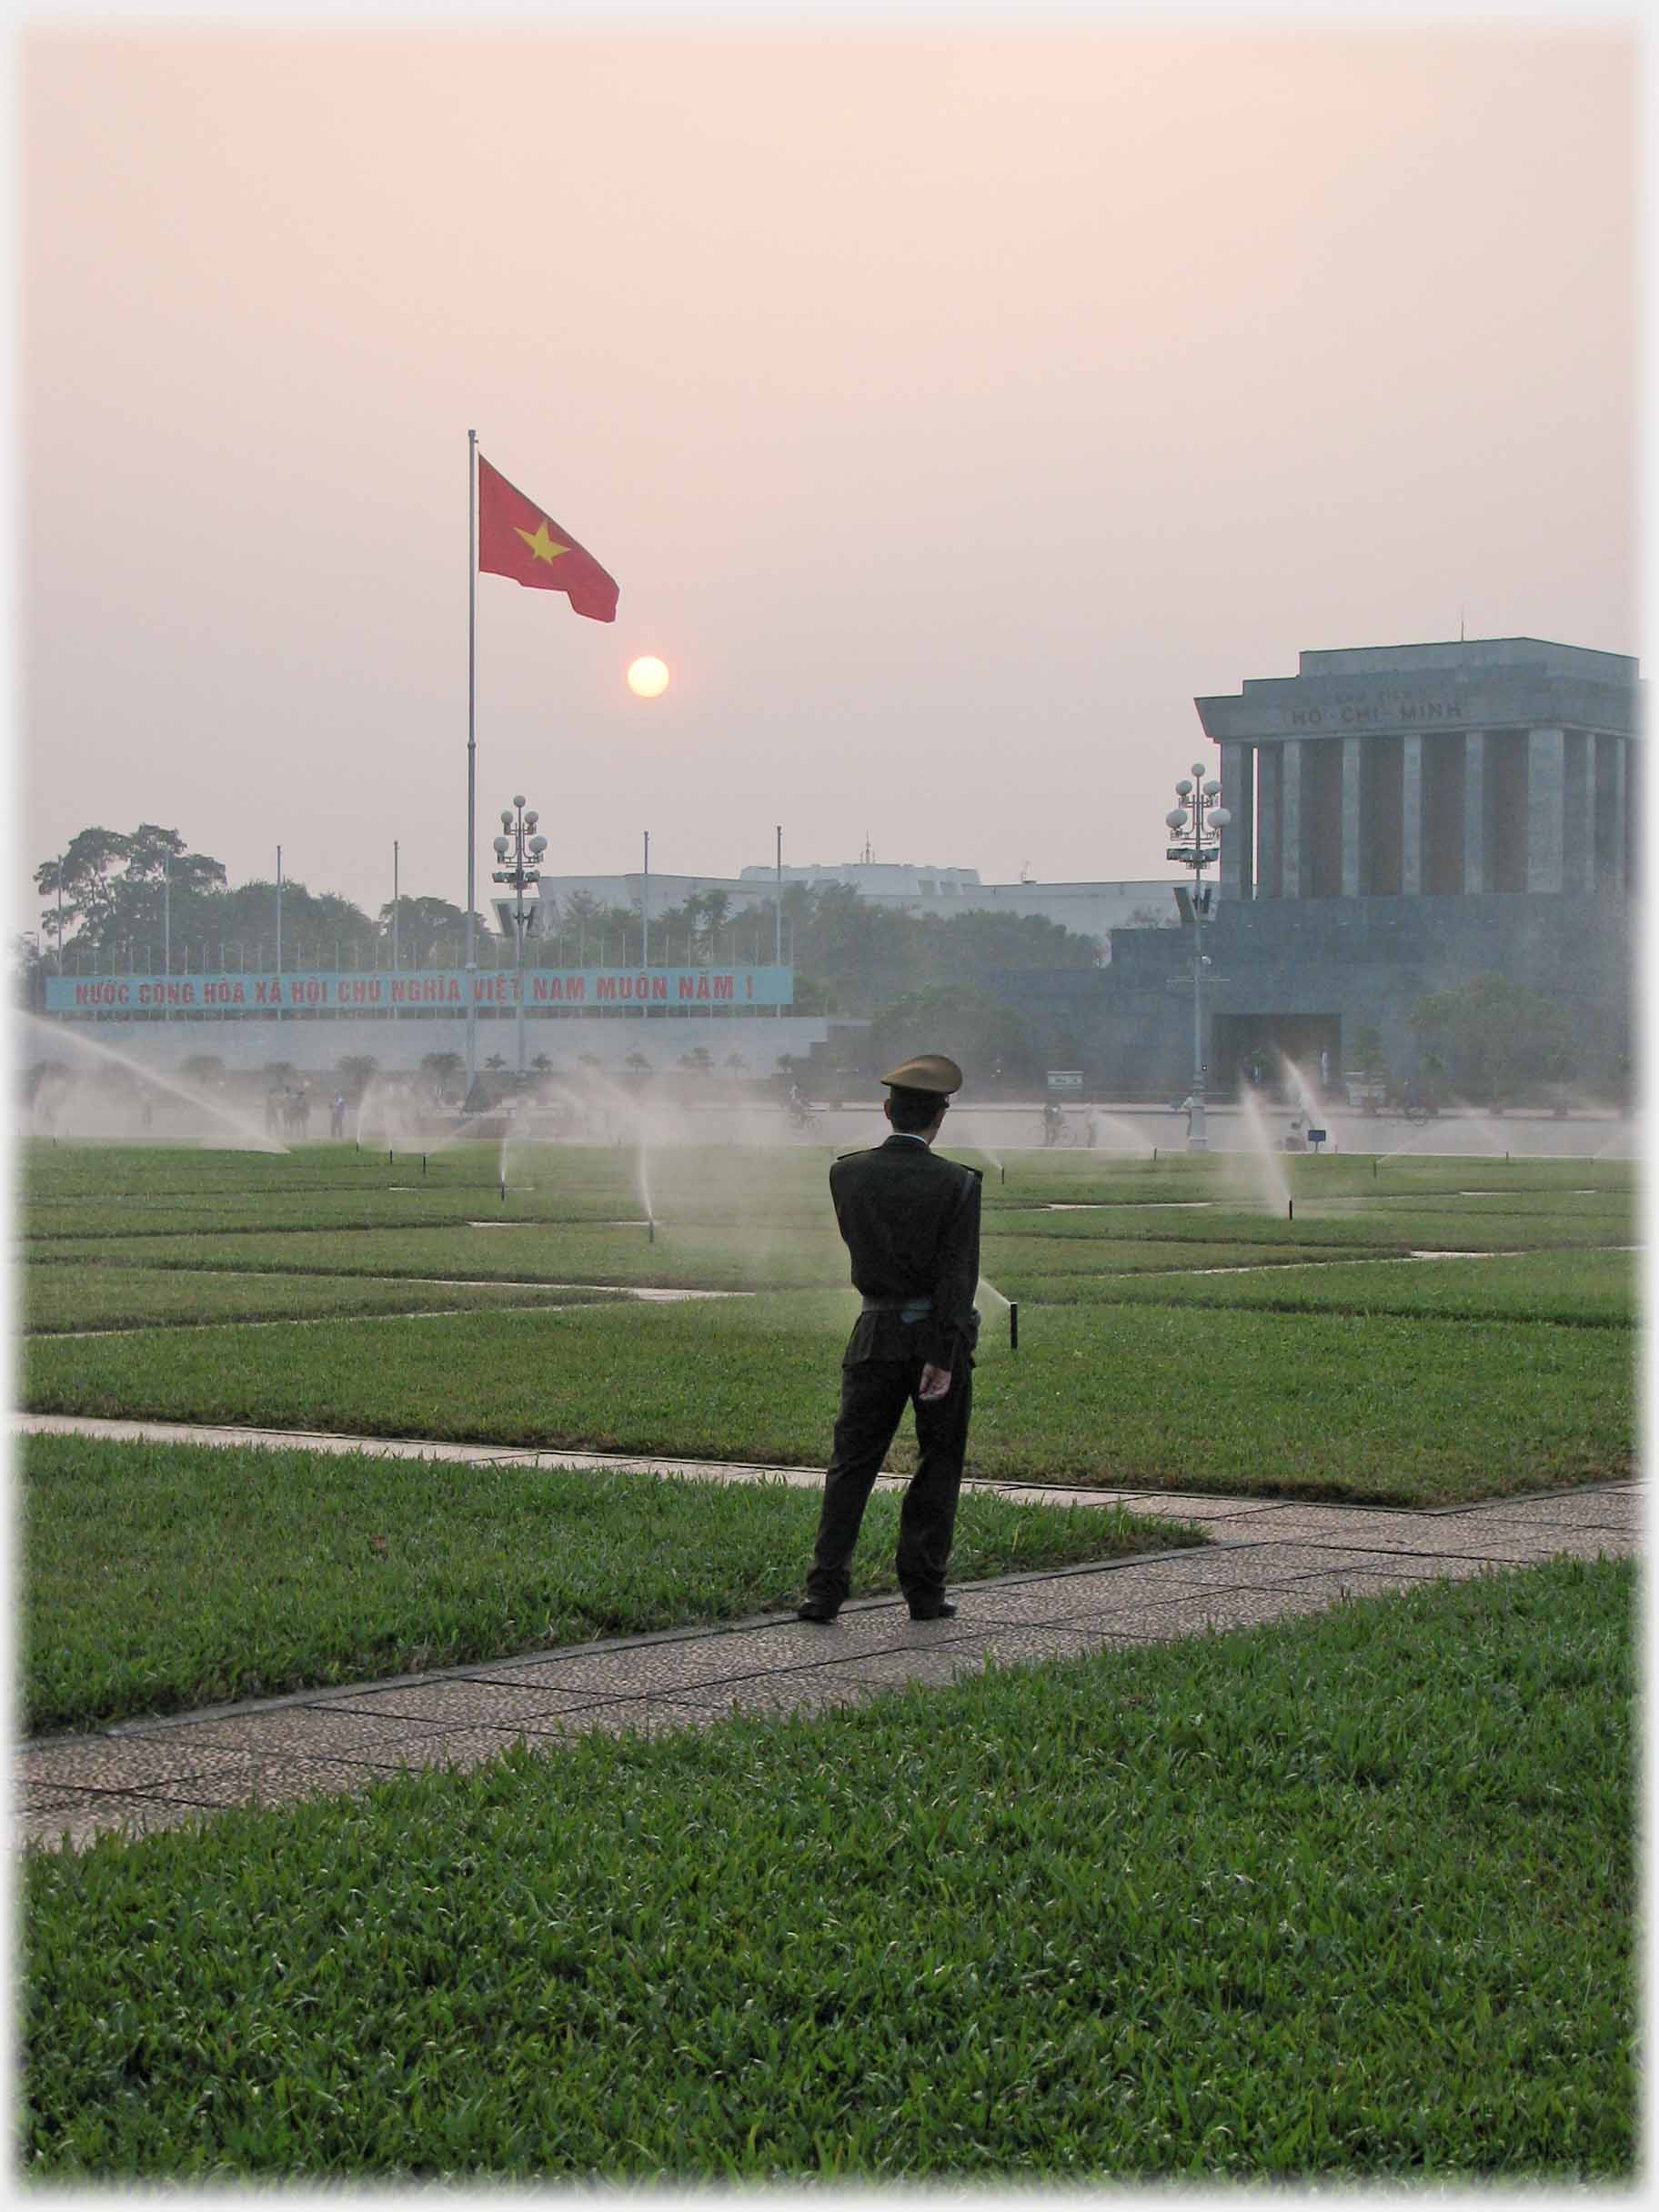 Maulsoleum and sprinklers watched by soldier.